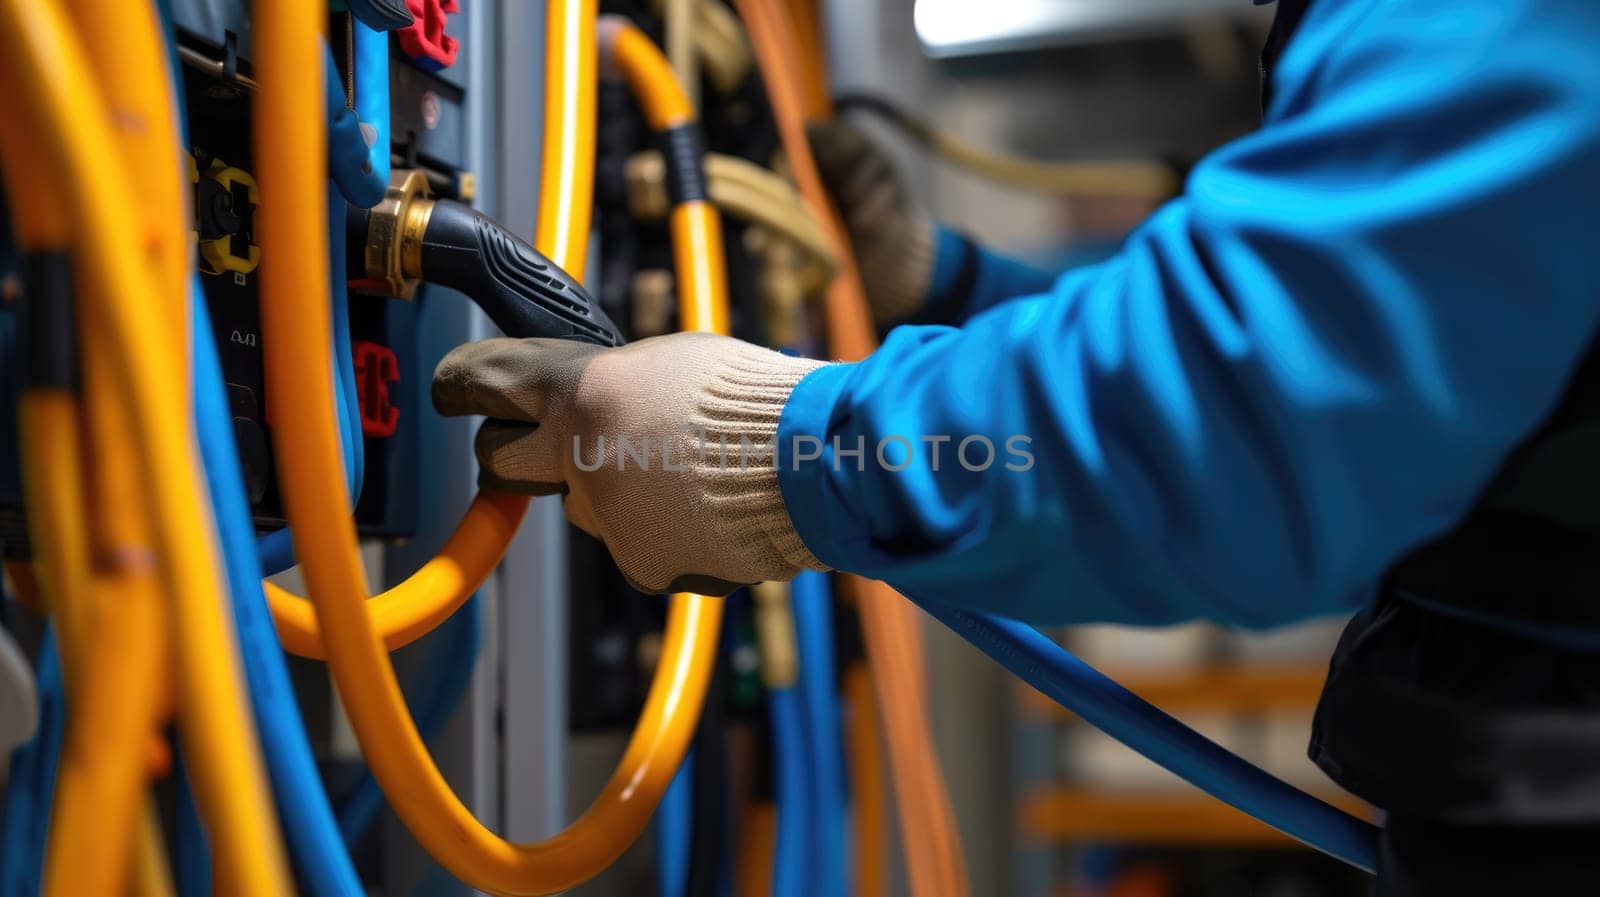 An engineer is using a drill to work on an electrical box, wearing electric blue workwear and safety gloves, handling wires and metal. AIG41